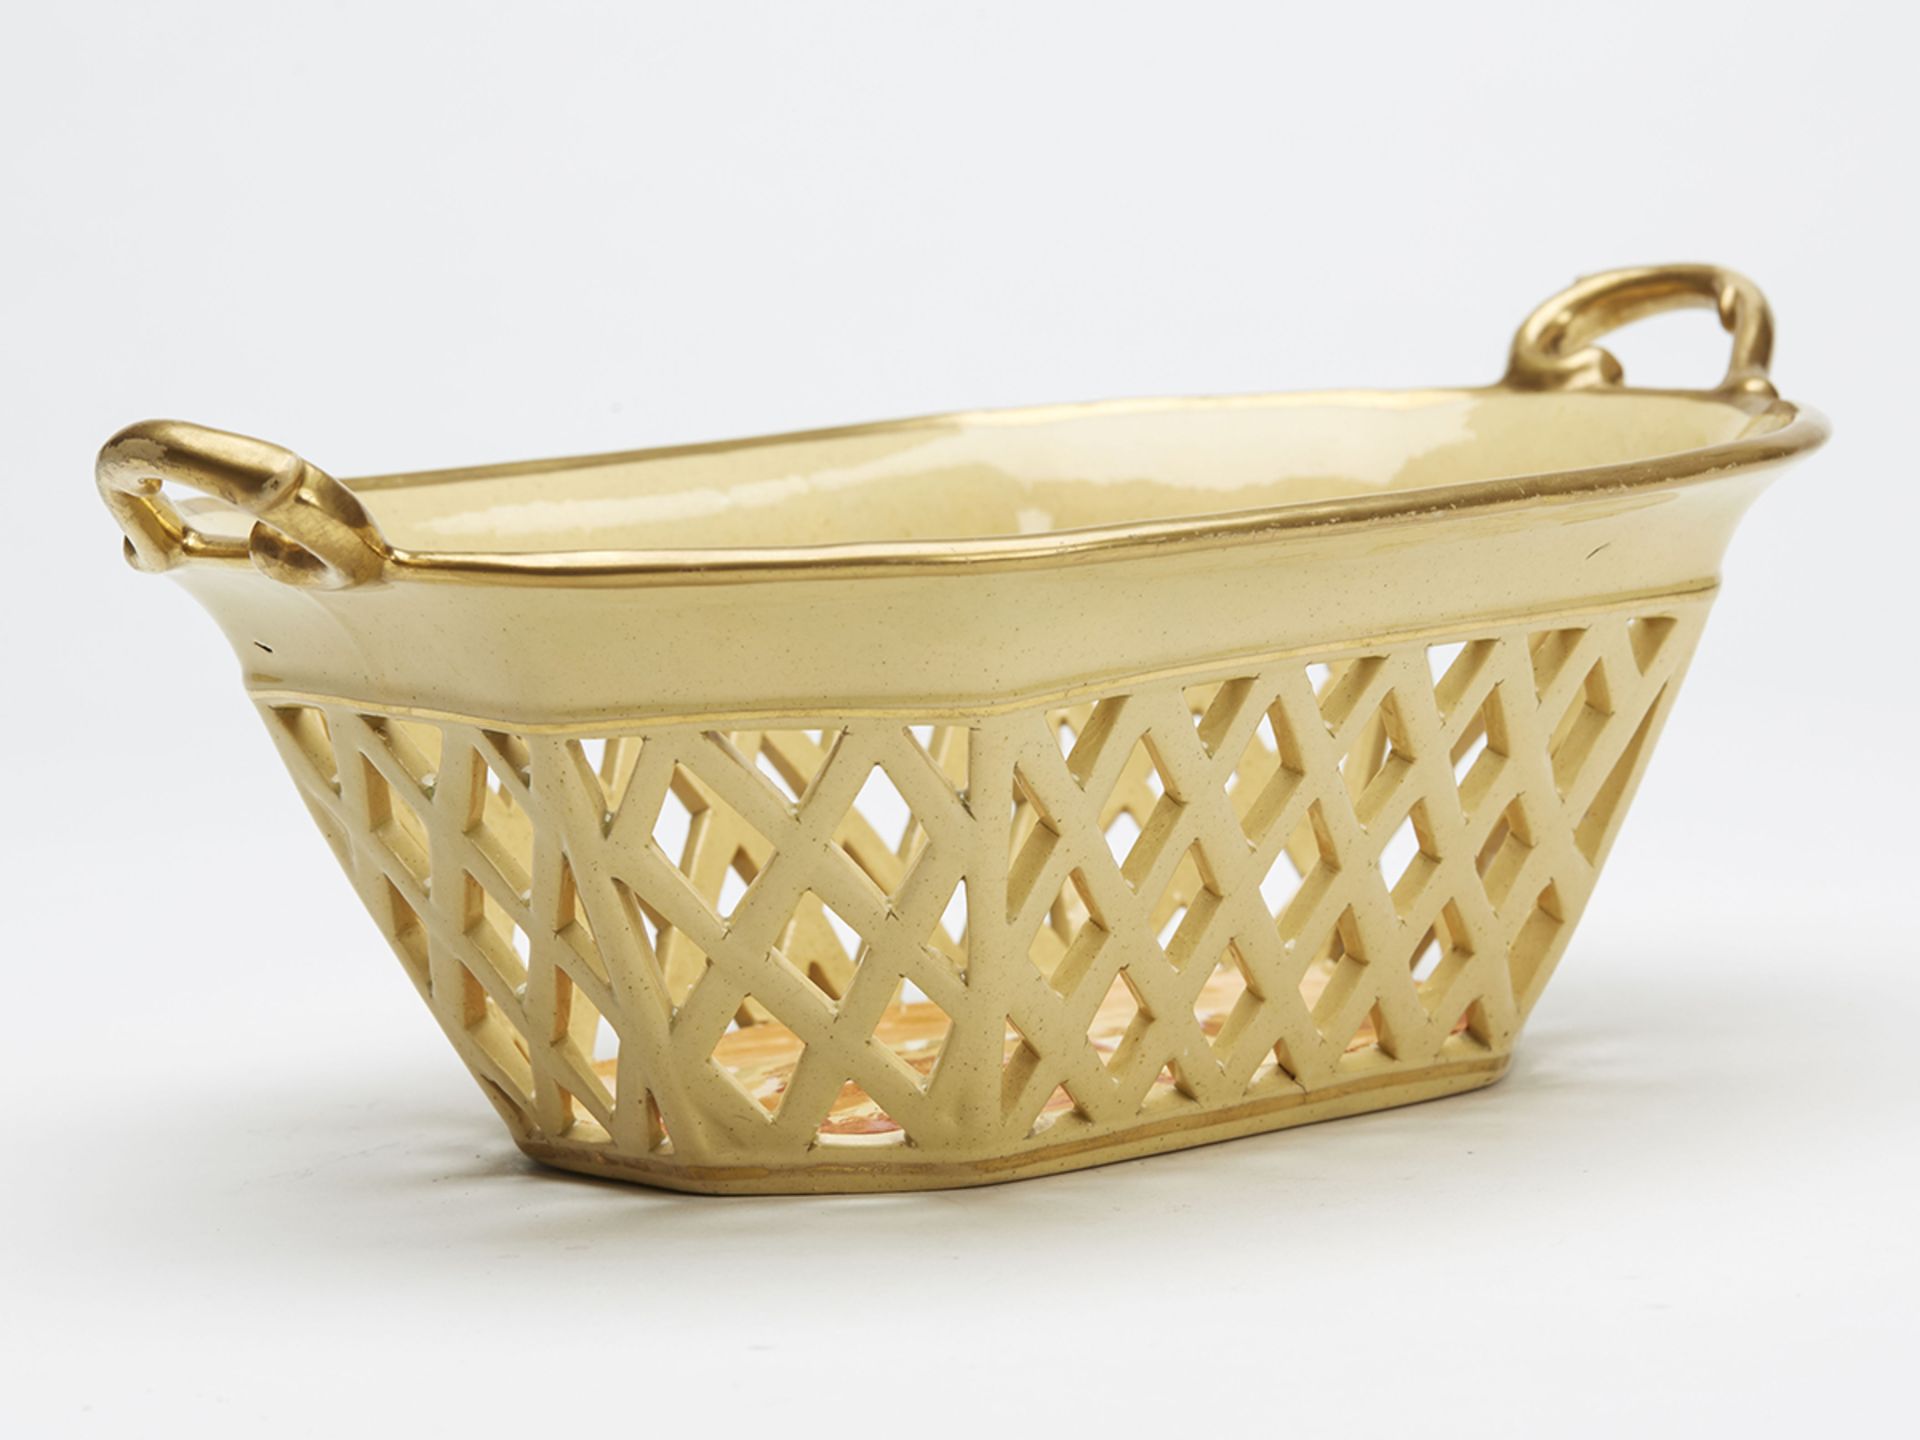 Antique Davenport? Drabware Basket & Stand Early 19Th C. - Image 12 of 12